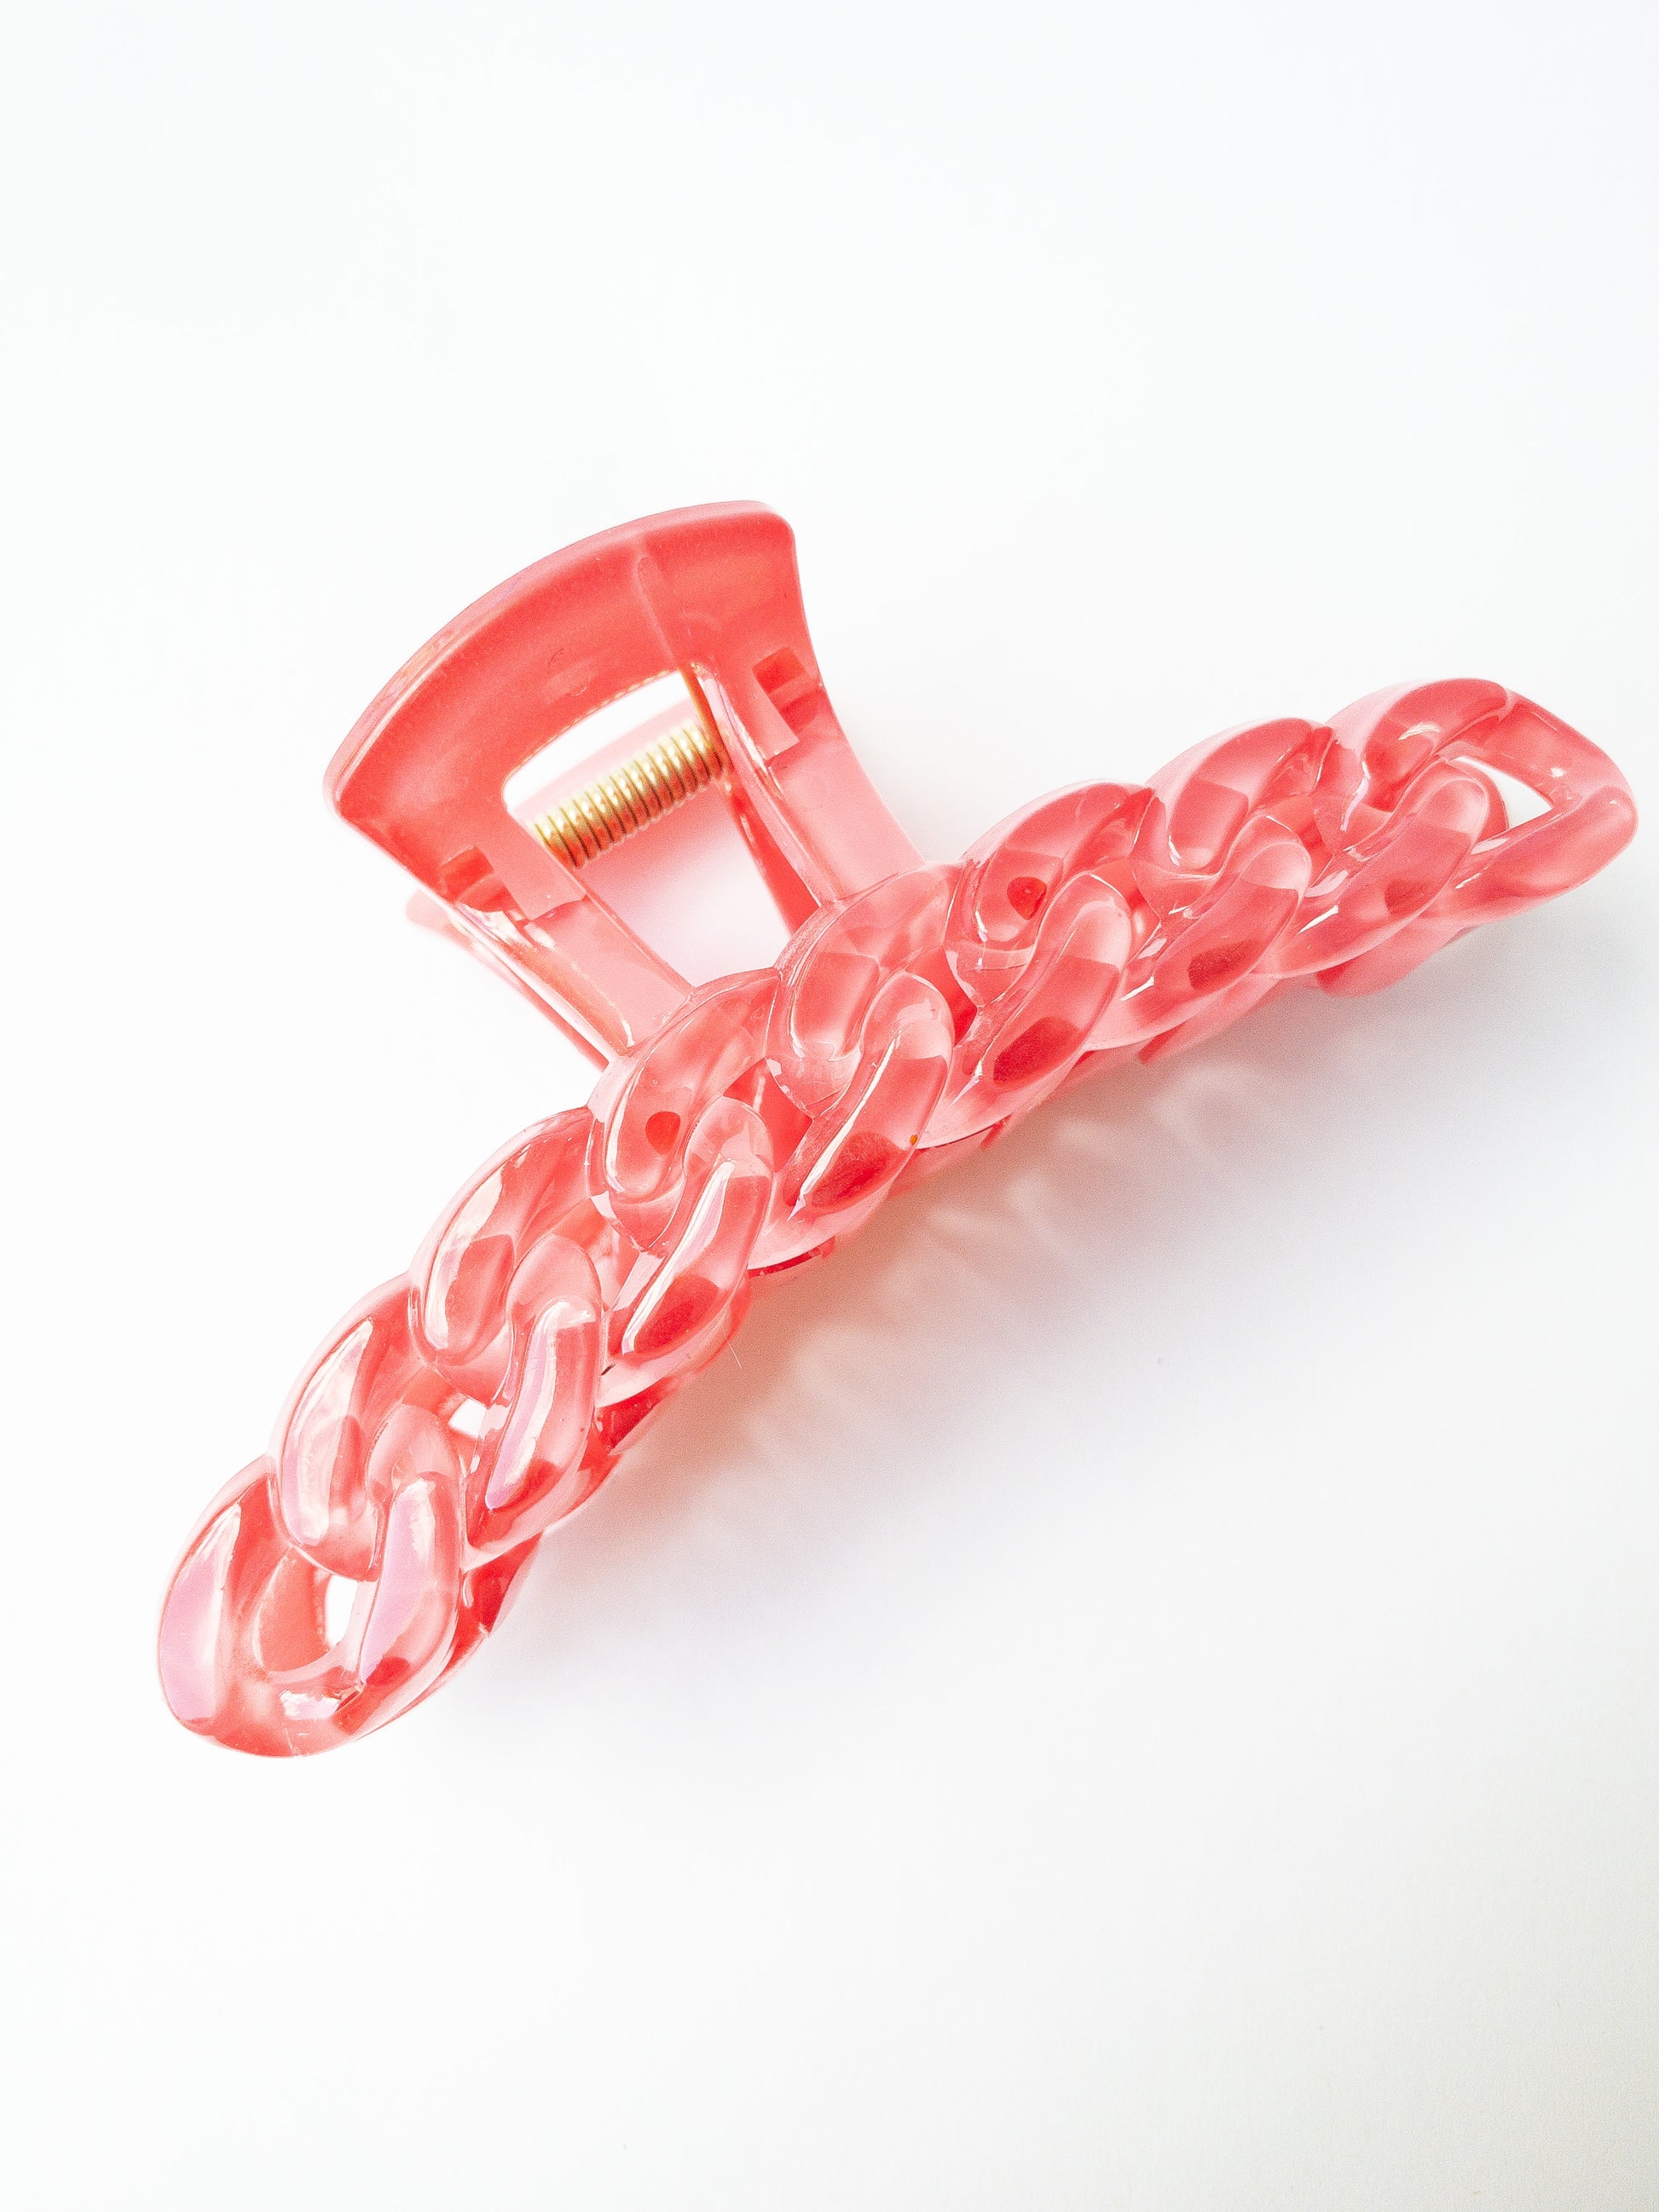 The brightest chain link hair claw clip in the most delectable candy hue! This pink hair claw is large in size and strong enough to sweep up your hair in a messy updo. You're going to want one in every color!